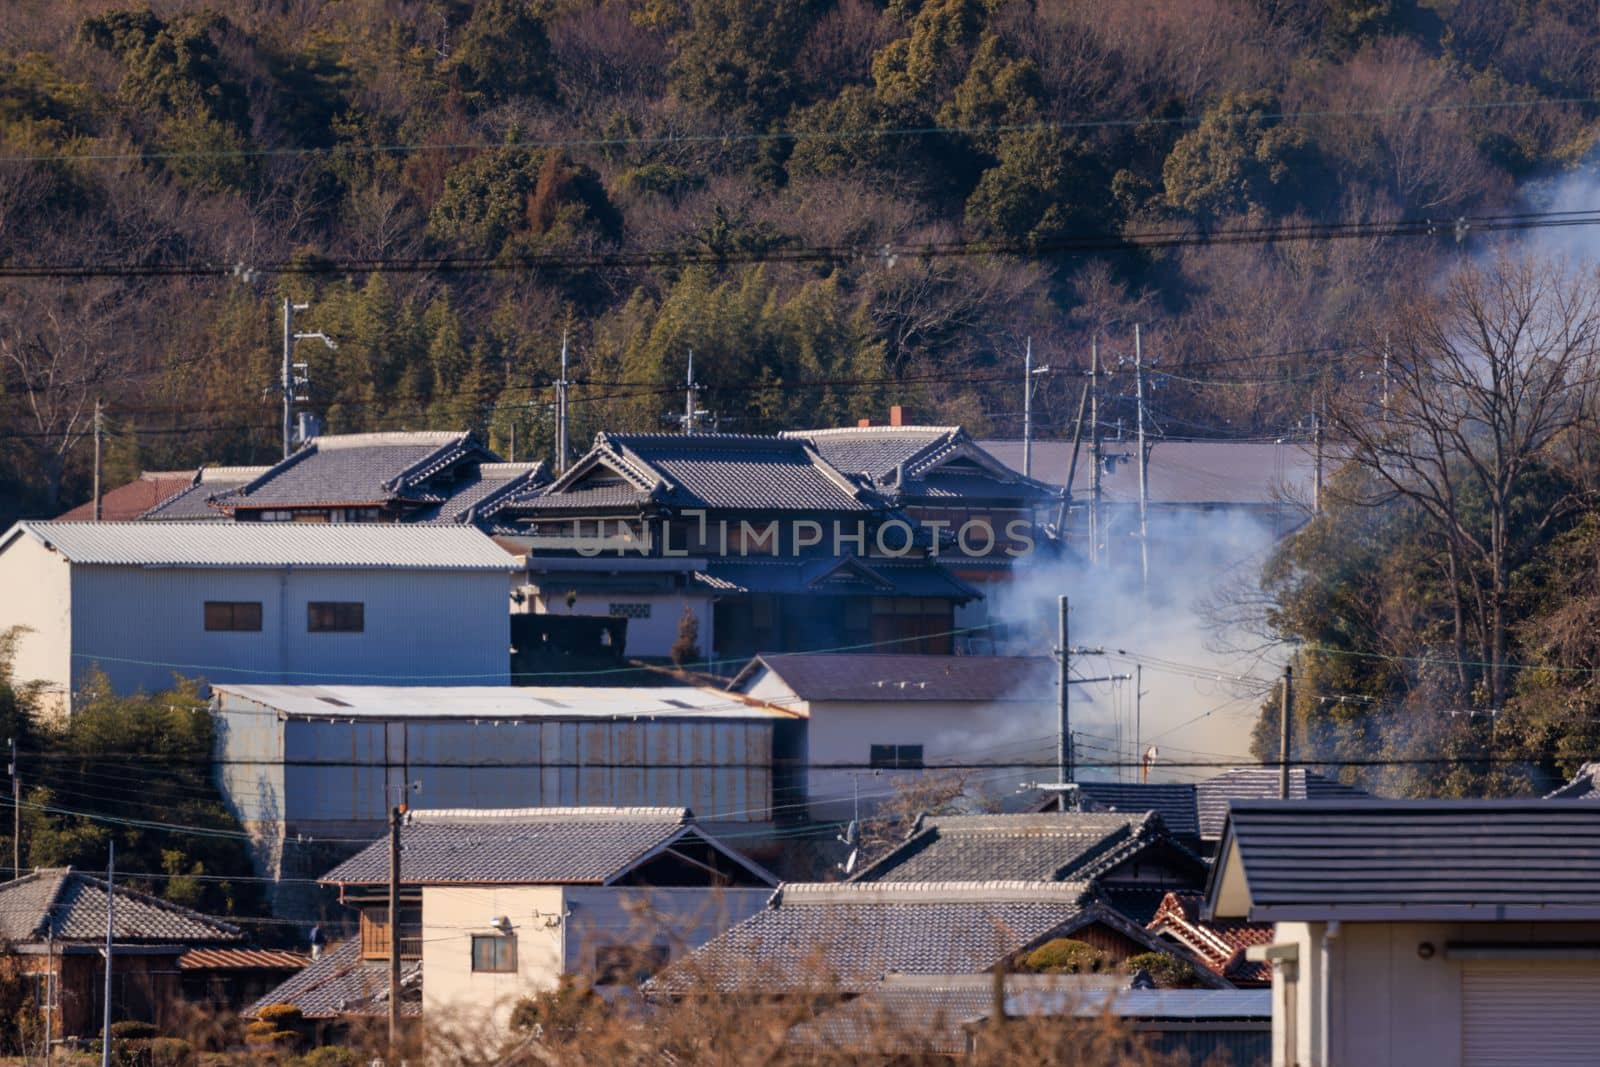 Smoke rises from houses in suburban Japanese neighborhood on sunny day by Osaze